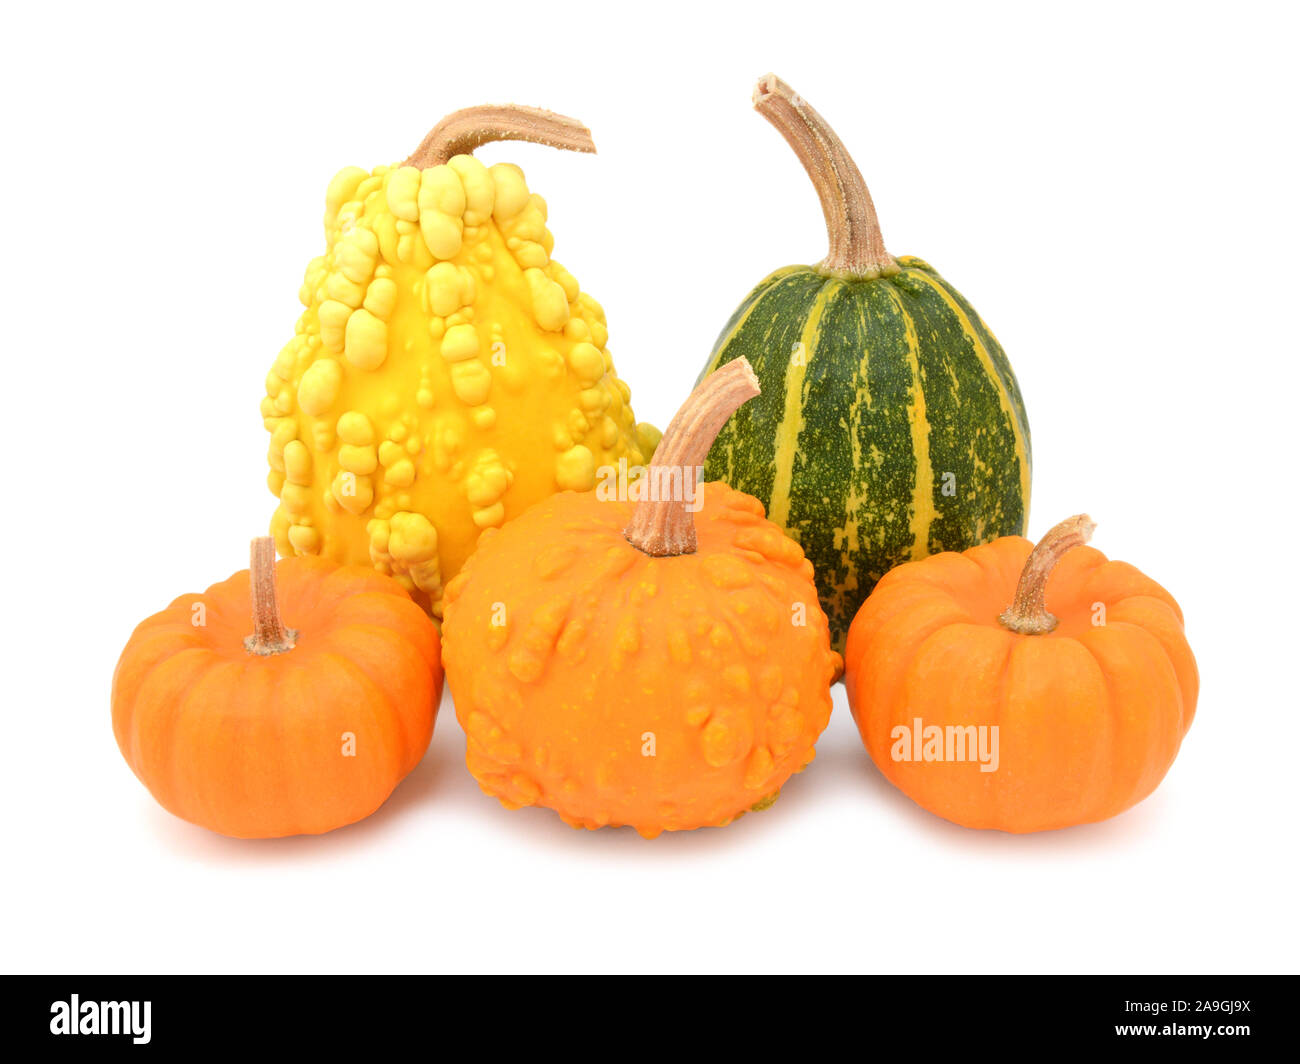 Five decorative gourds with smooth and warted skin - yellow, green and orange squashes, on a white background Stock Photo